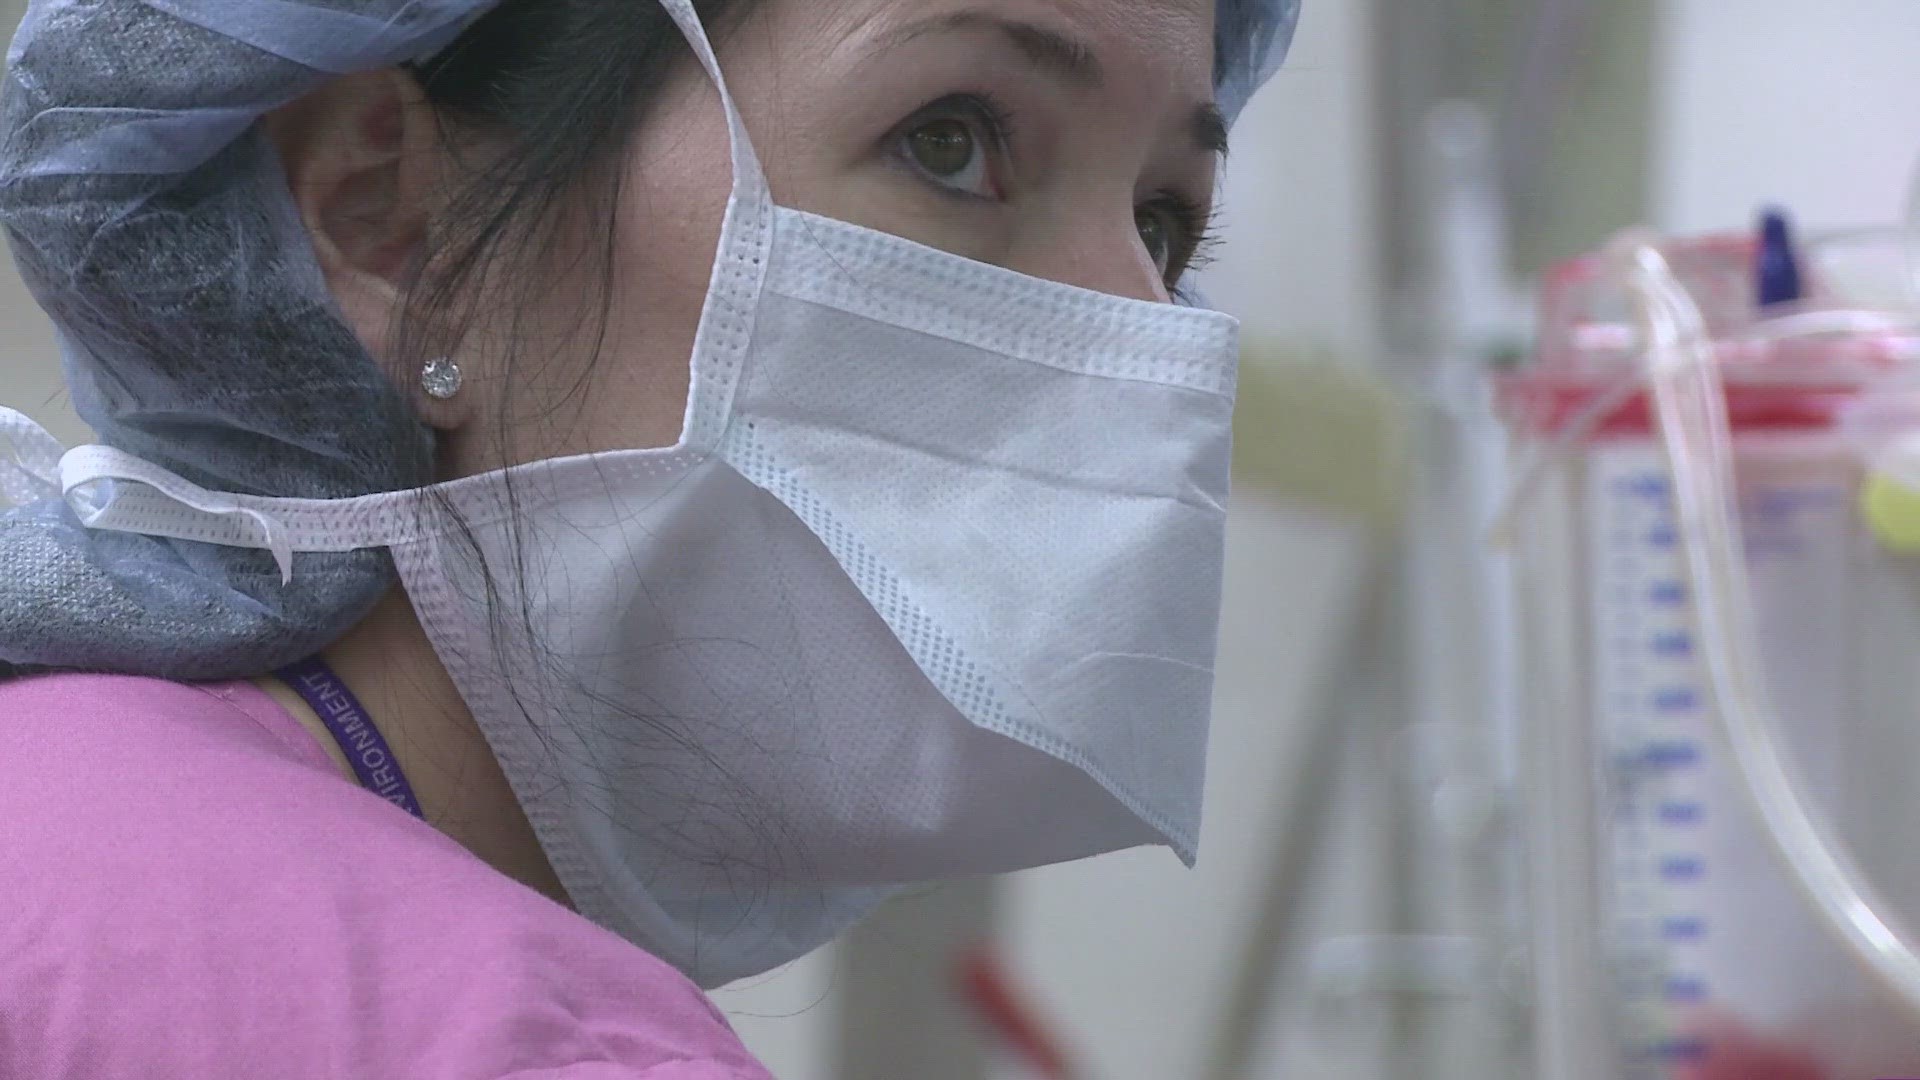 It is projected in the next two years, New Orleans will have a shortage of around 2,500 registered nurses.